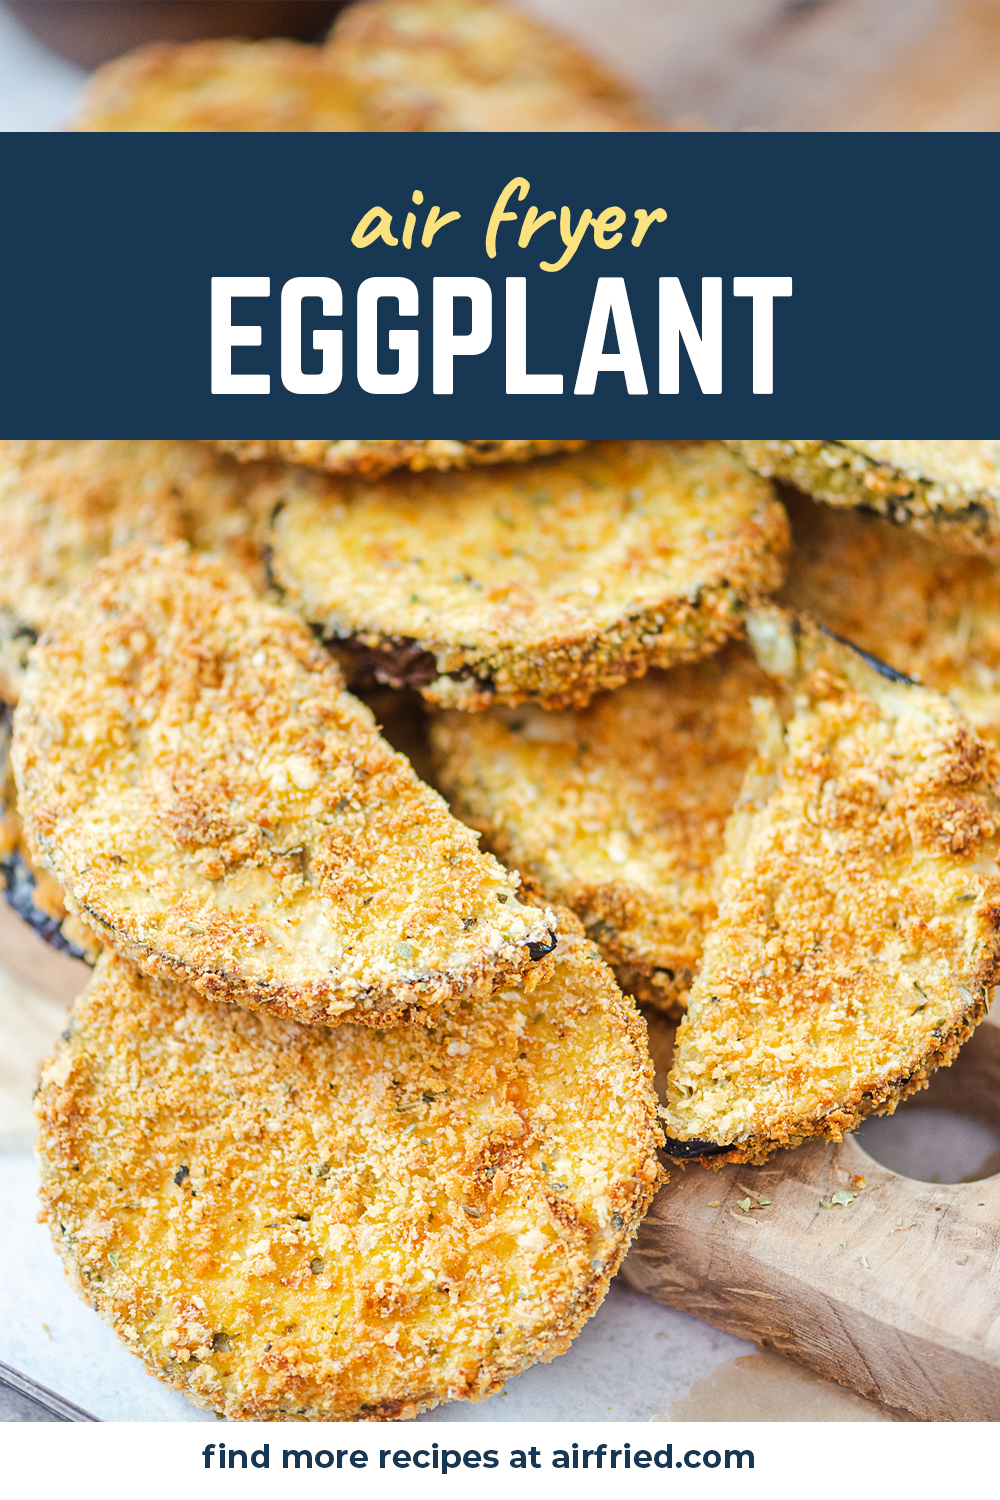 This crispy air fryer eggplant is great as an appetizer with some marinara dip!